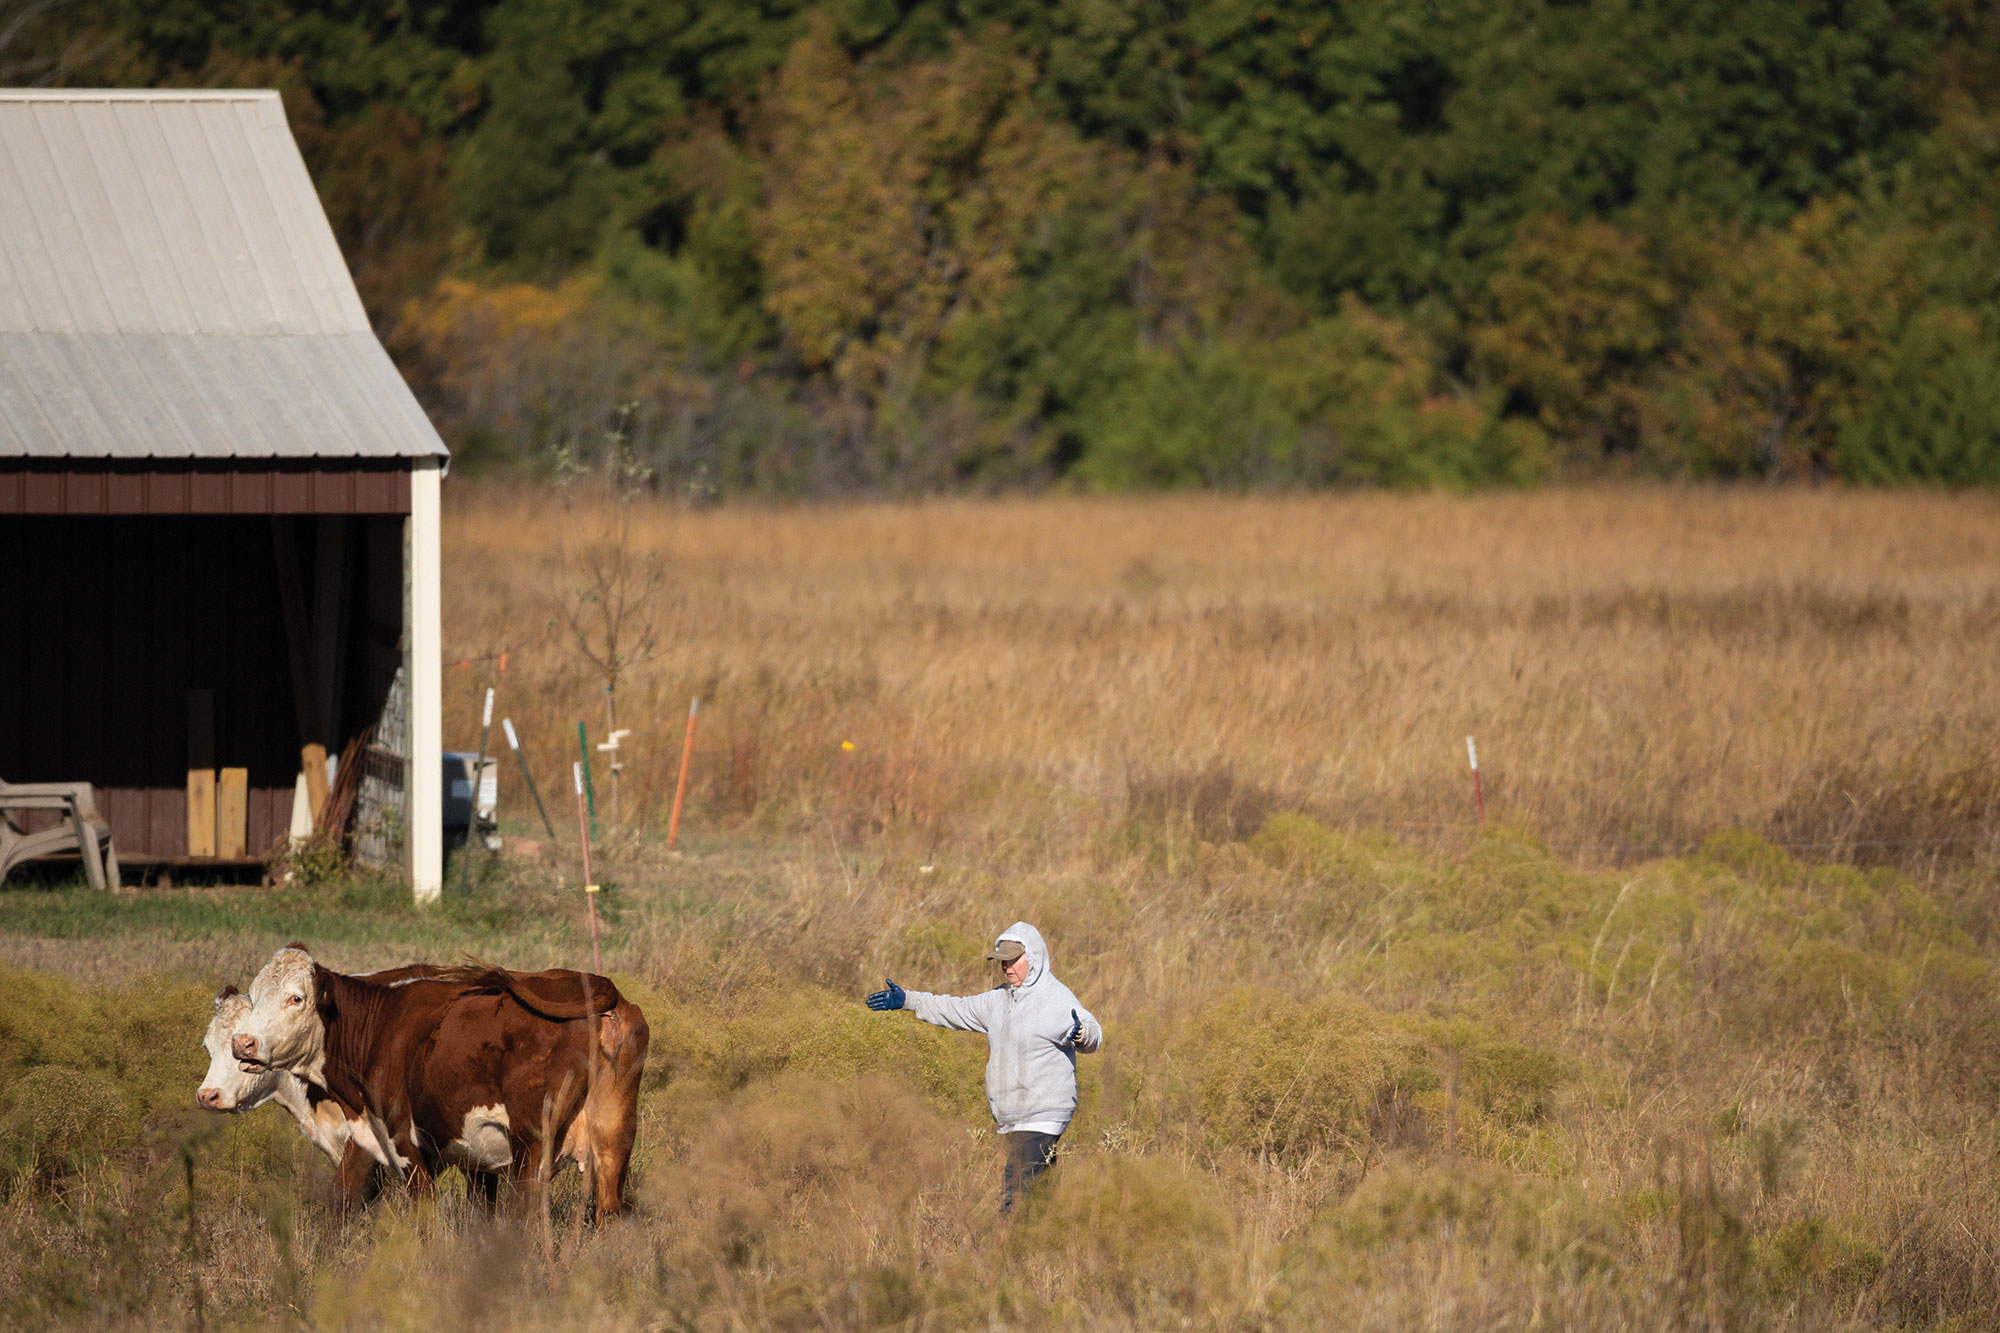 Karen Payne (pictured) and her husband, William, raise Hereford and Angus cattle on Destiny Ranch, which was in poor condition when they bought it in 2006.